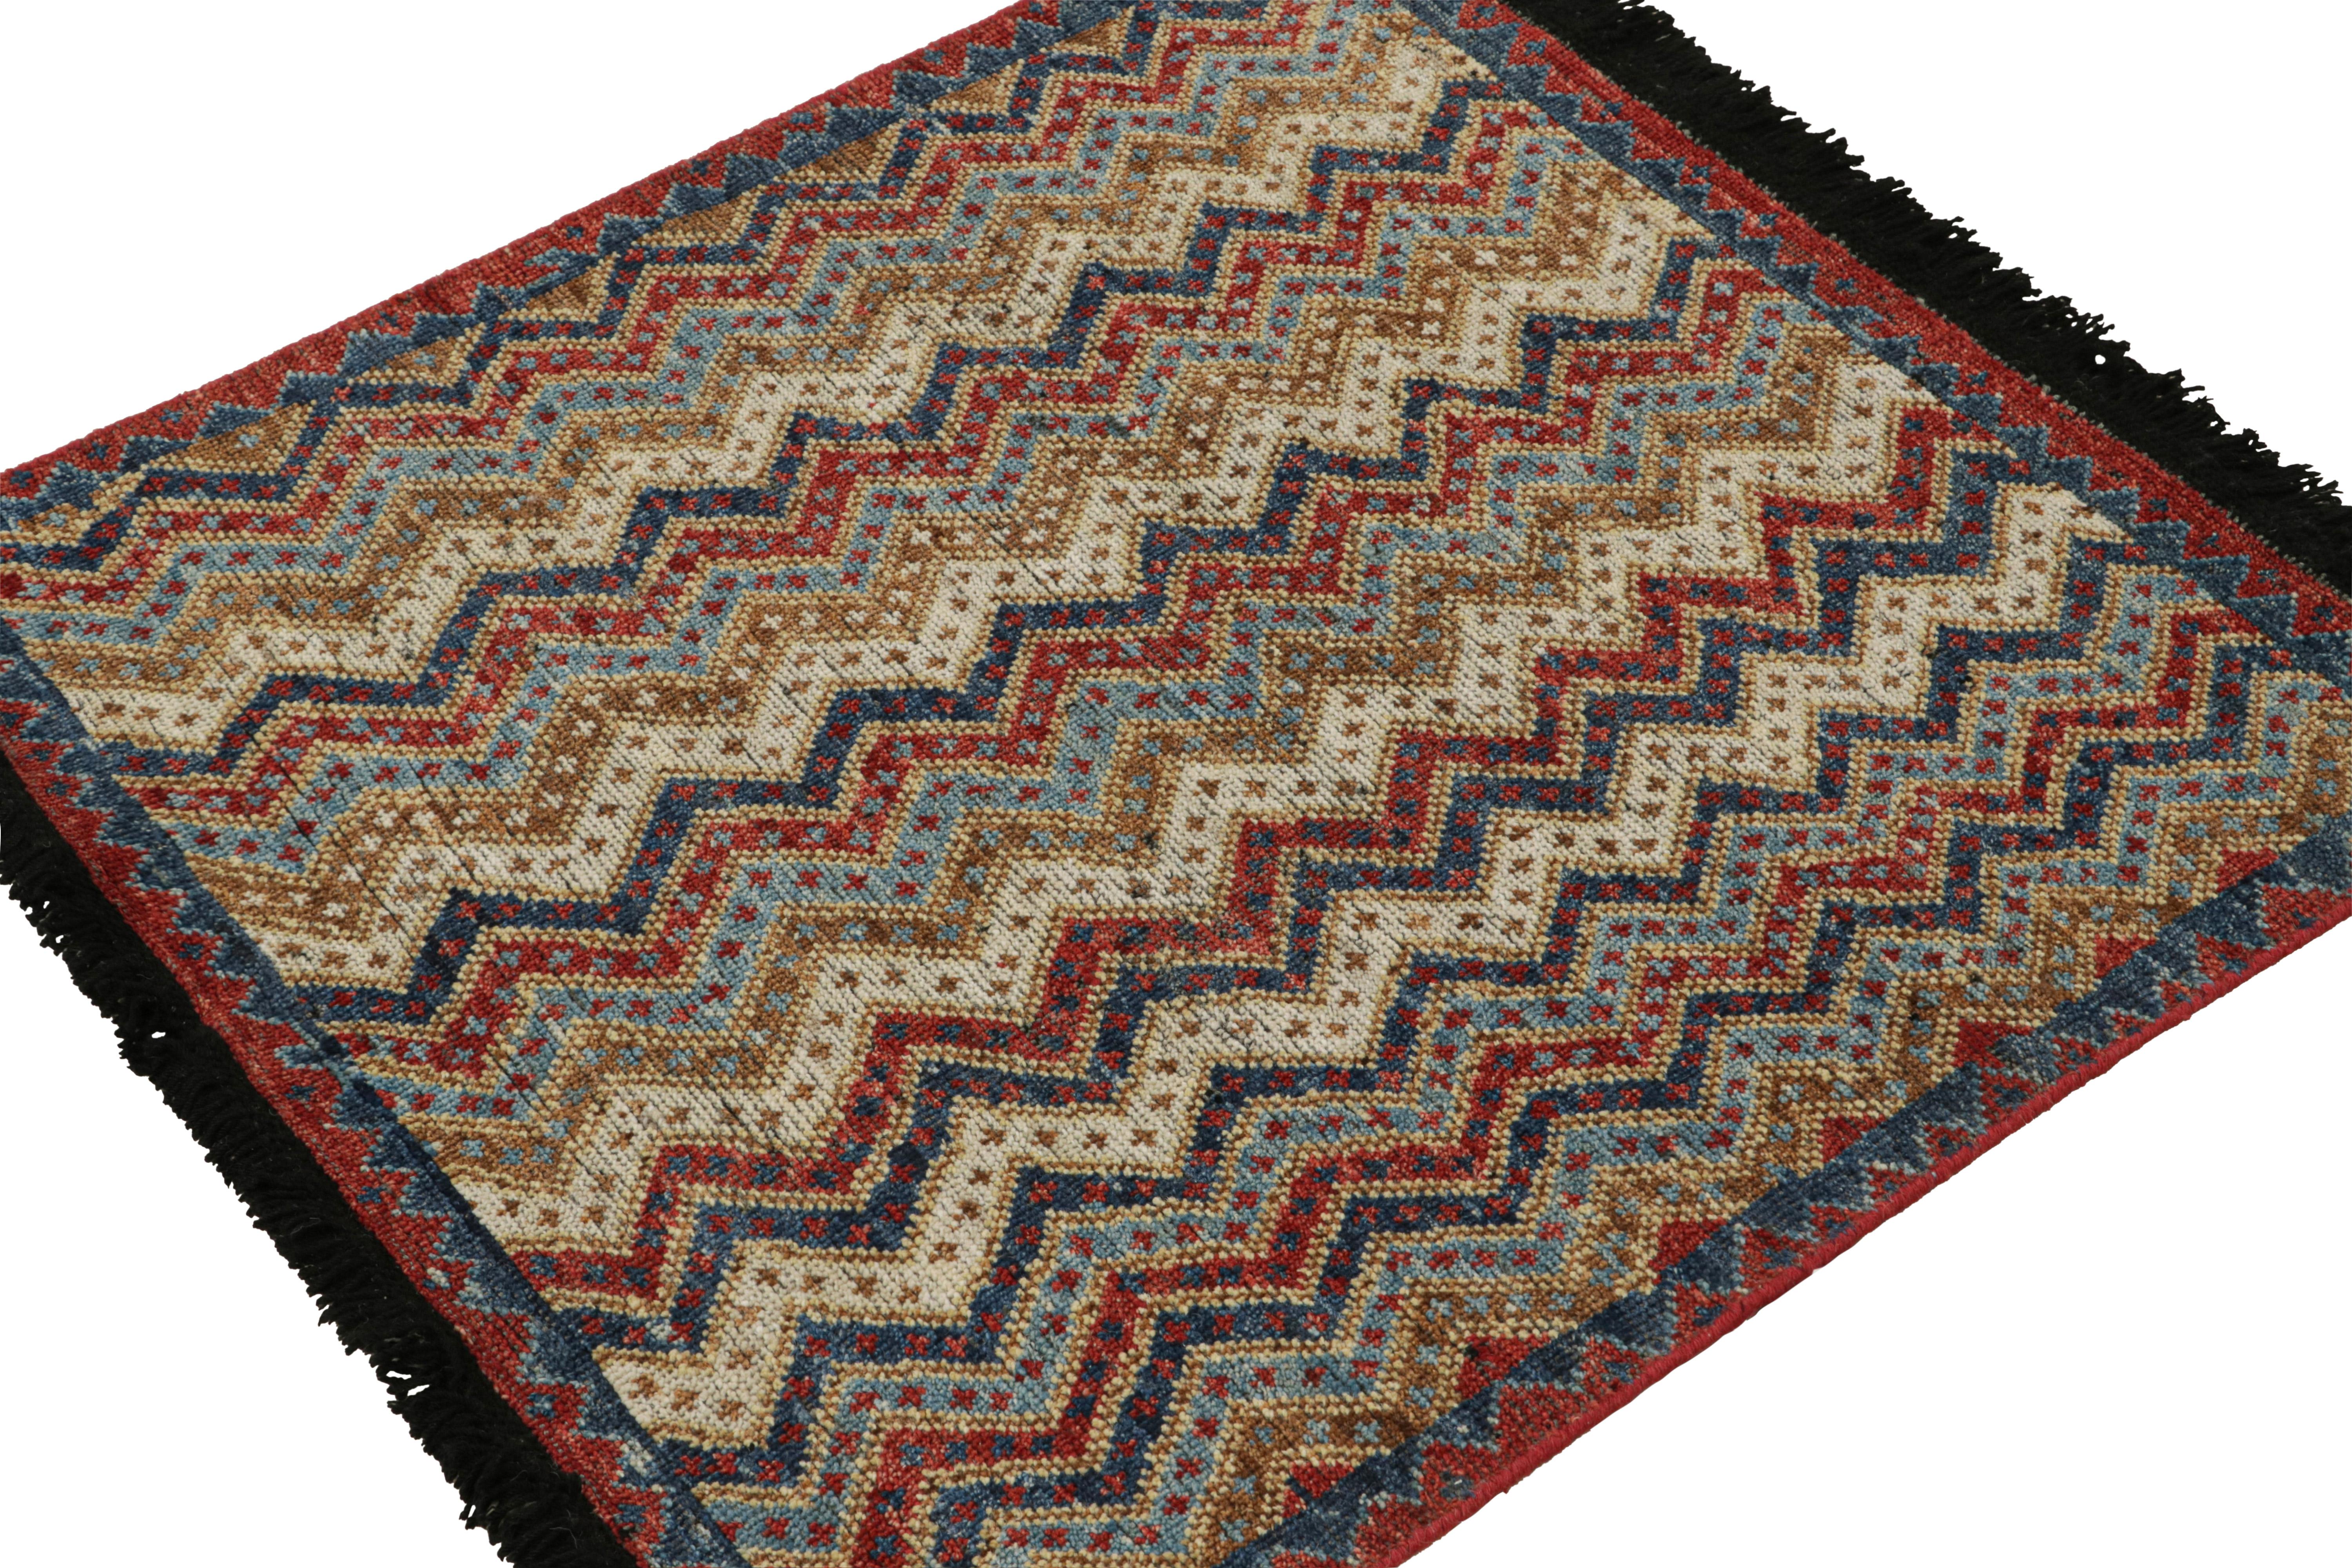 This 3x3 rug is a grand new entry to Rug & Kilim’s custom classics Burano collection. Hand-knotted in wool.

On the design: 

This rug is inspired by antique tribal rugs & features chevrons with fine geometric patterns in rich colors of red,